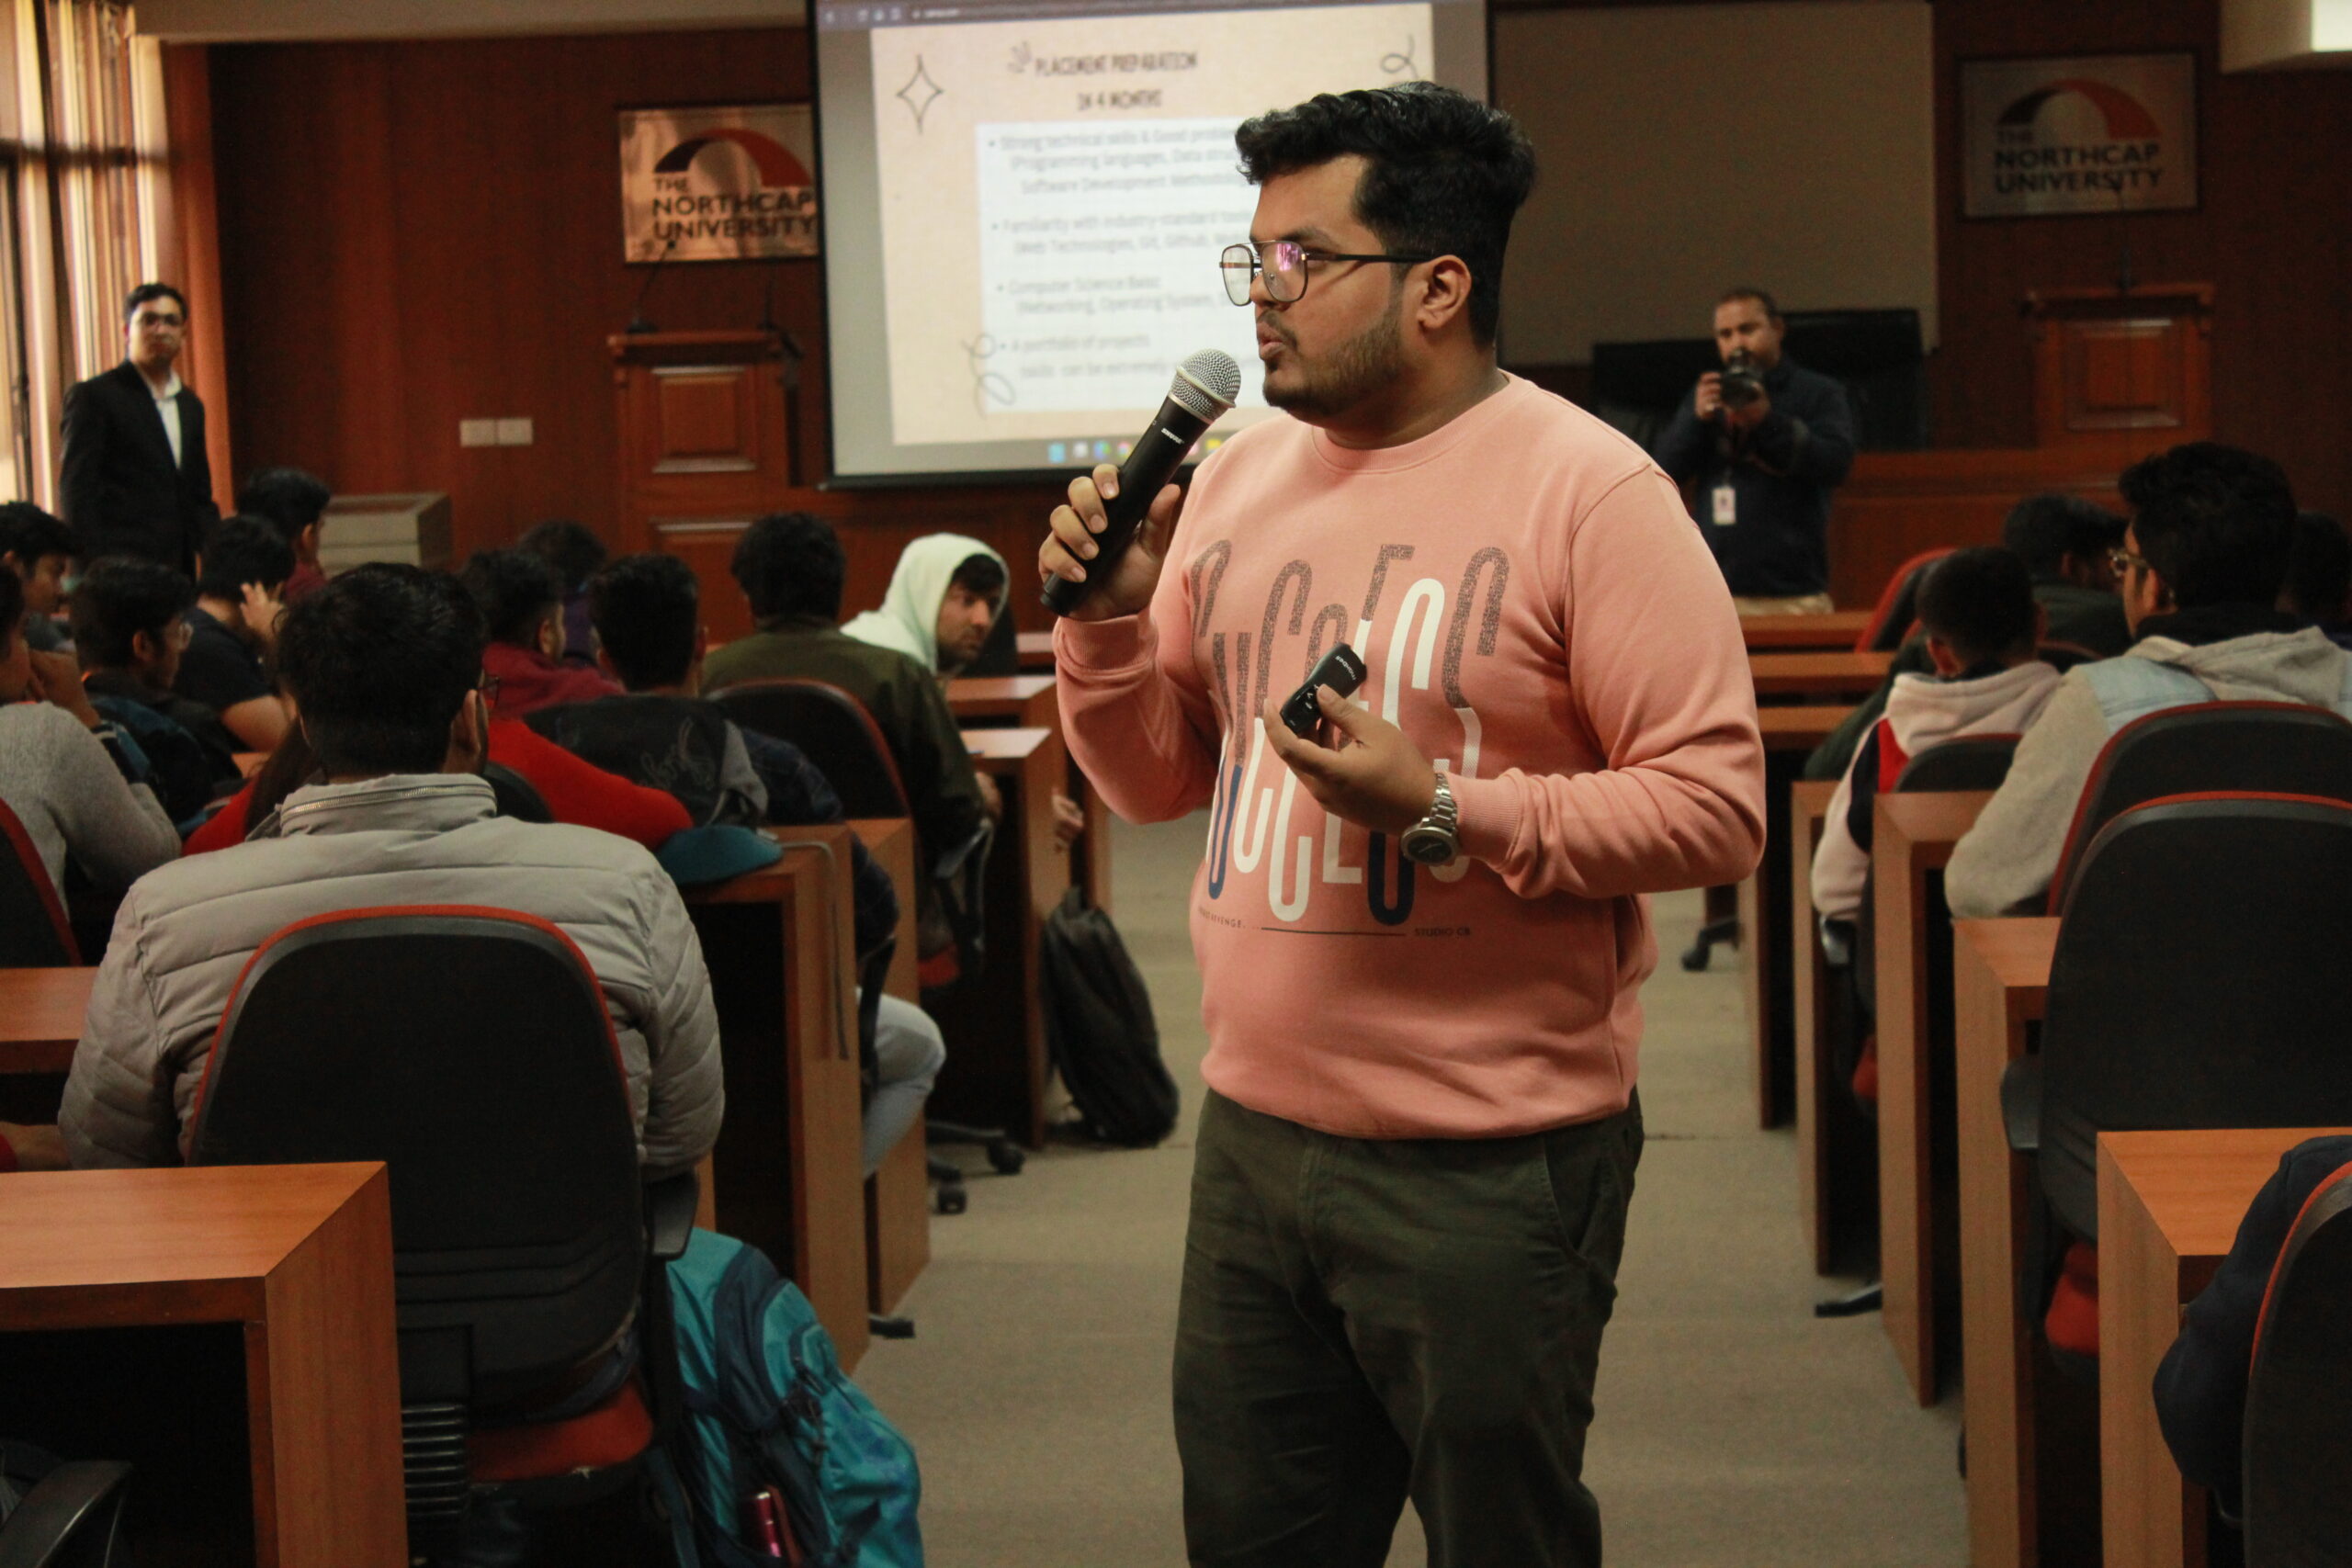 Workshop on Off-Campus Placements & Resume Building - The NorthCap University